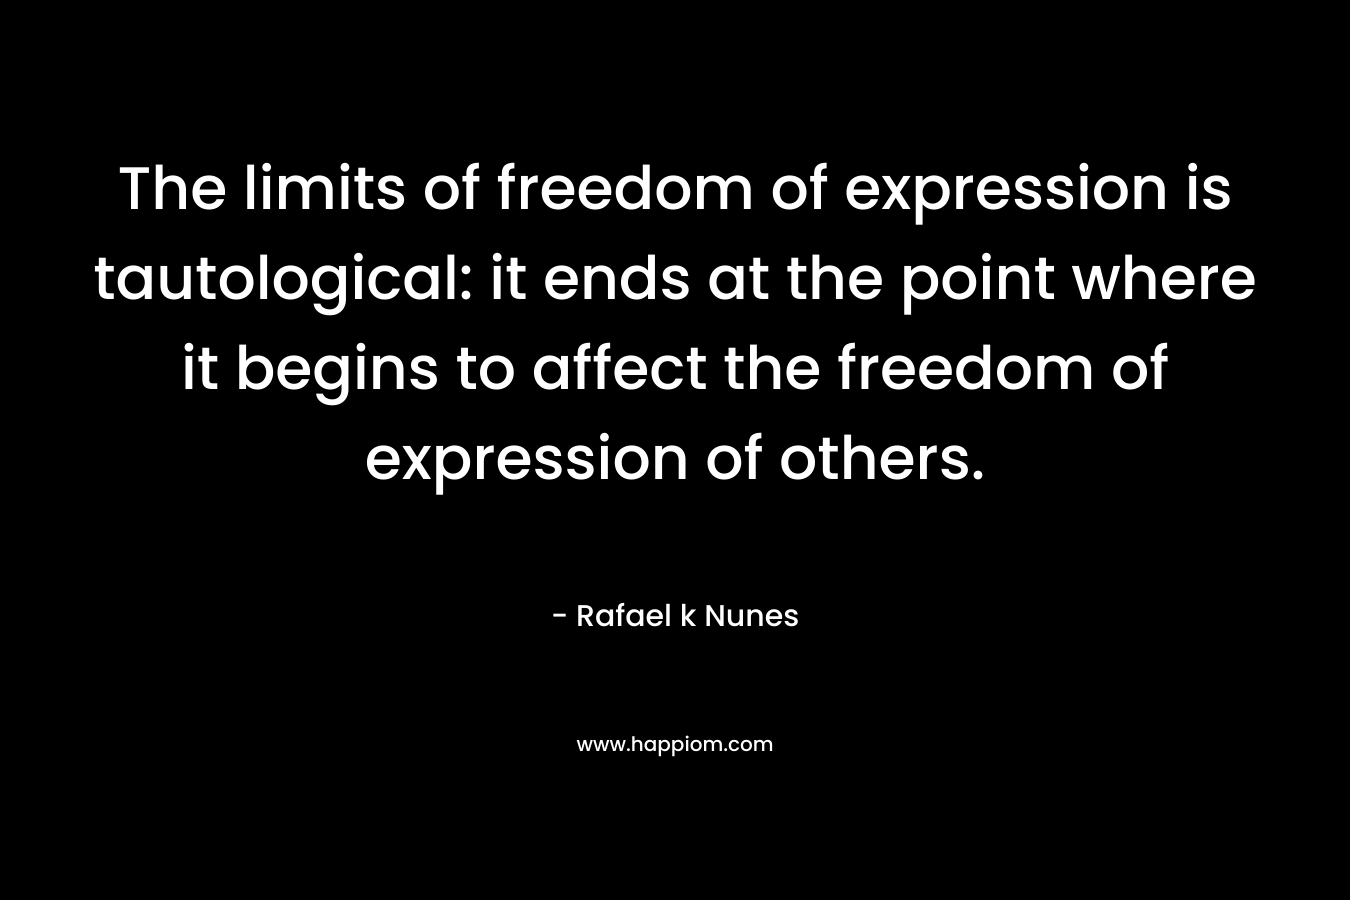 The limits of freedom of expression is tautological: it ends at the point where it begins to affect the freedom of expression of others.